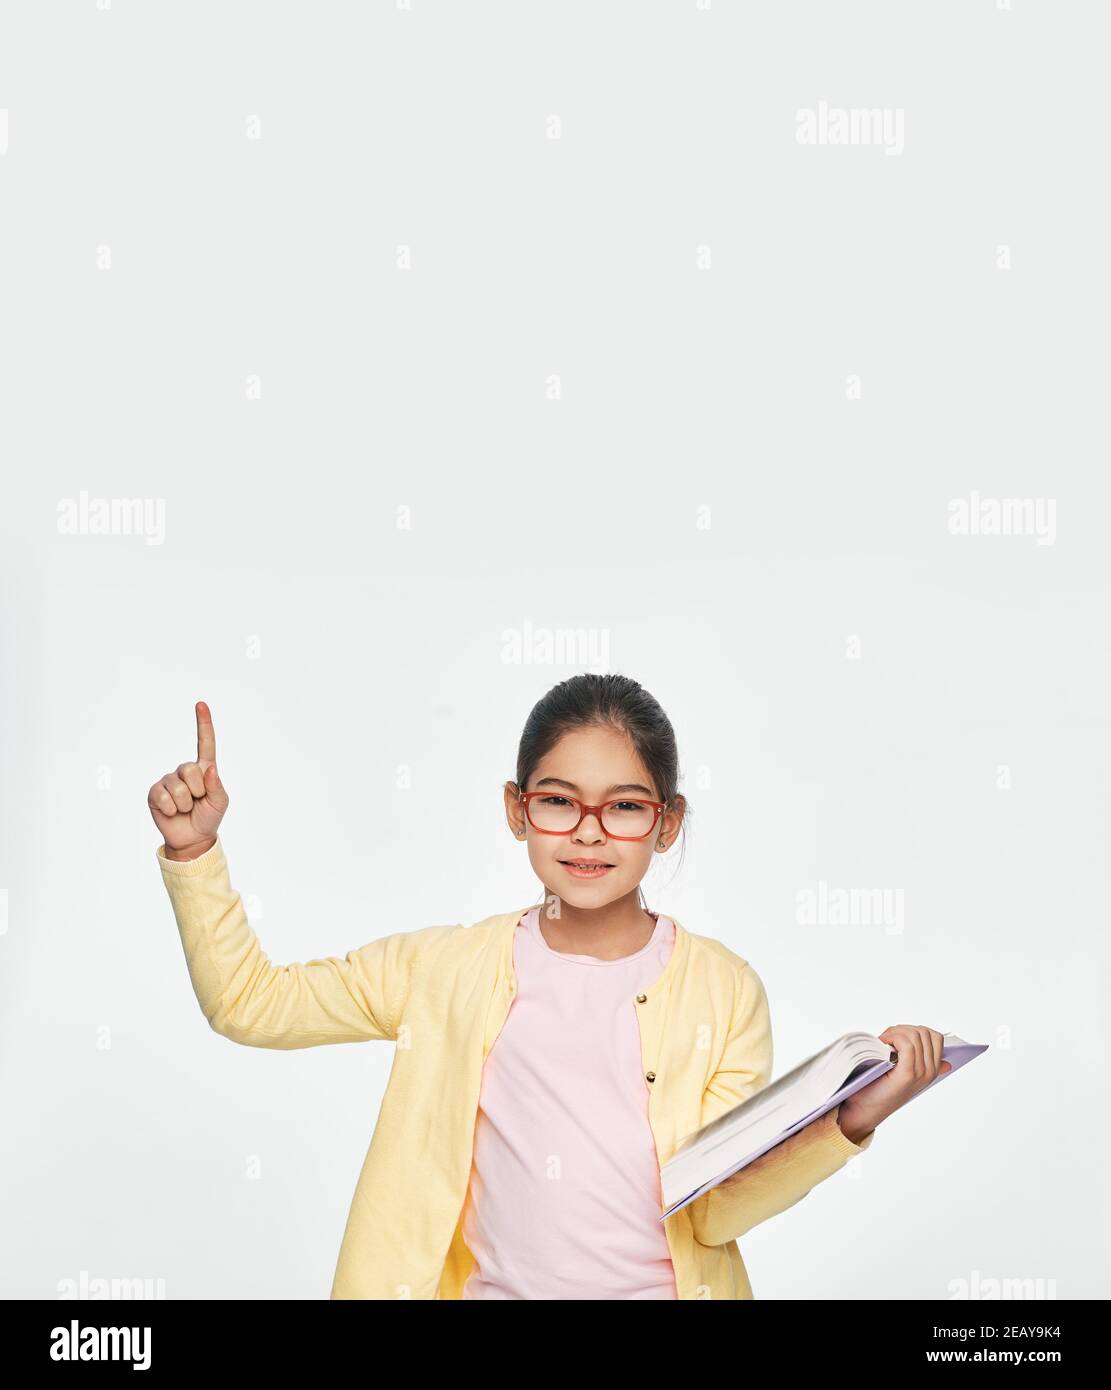 Asian child with book in hands shows index finger up, isolated on light gray background Stock Photo